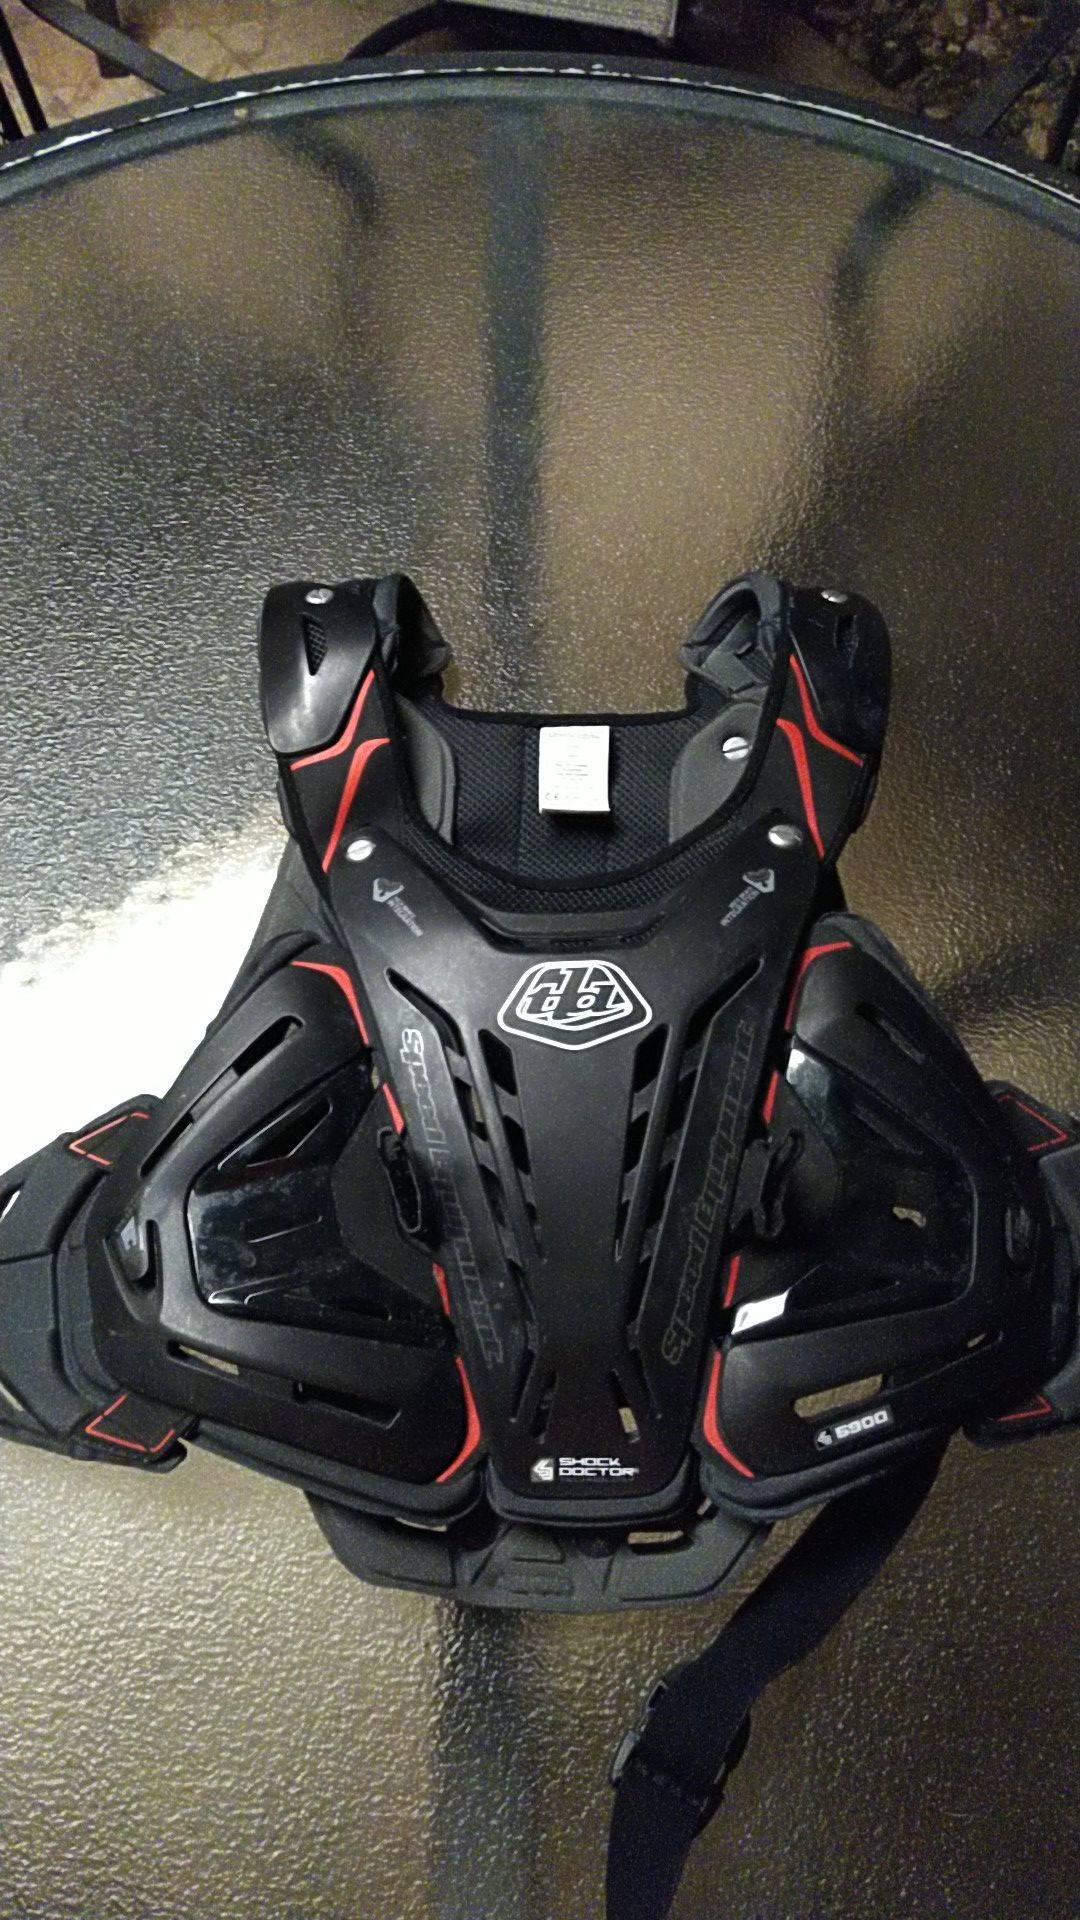 Tld Roost chest protector